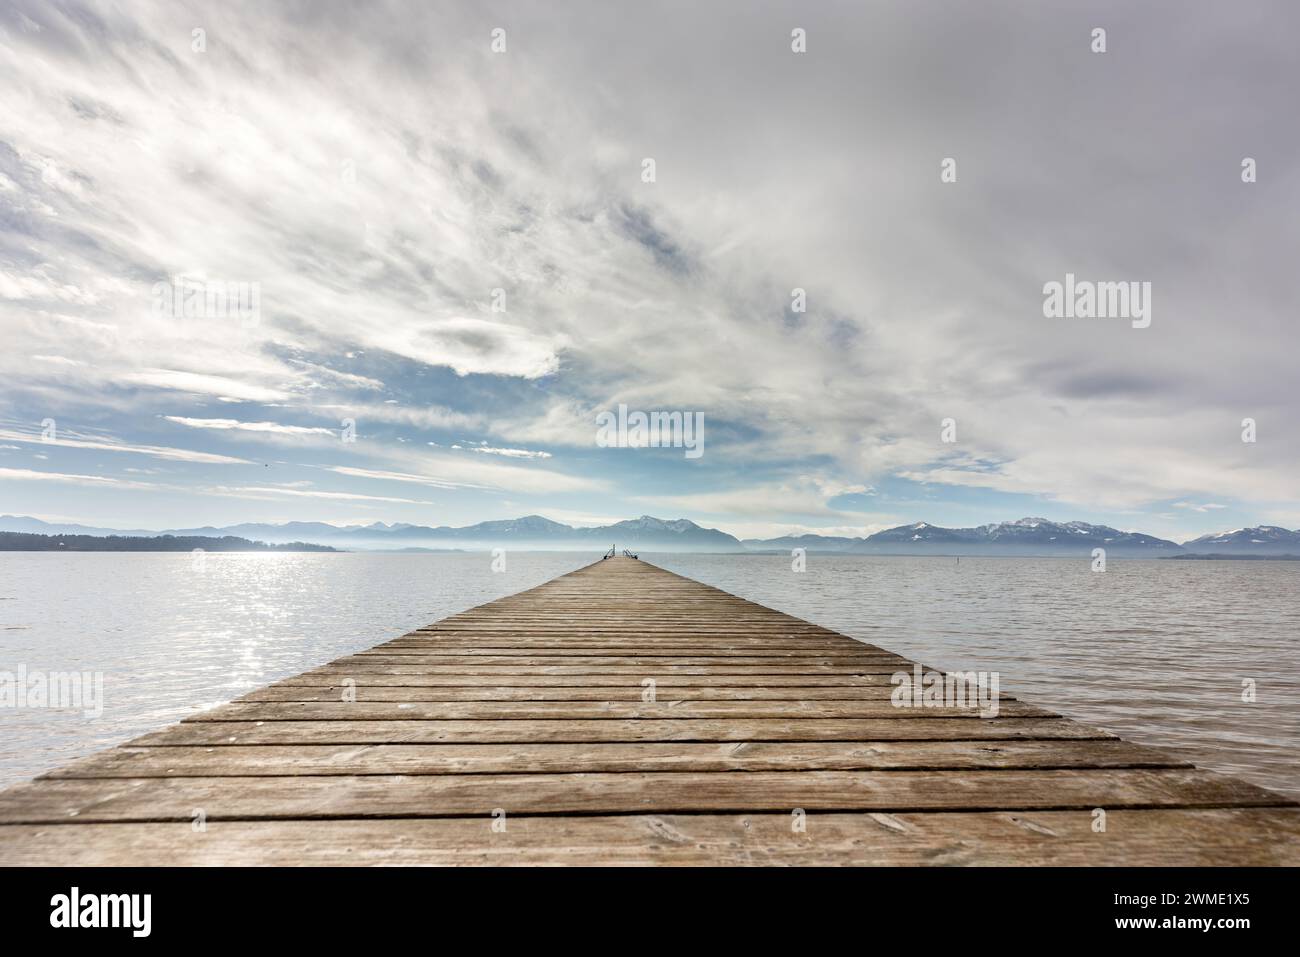 View at lake chiemsee, bavaria, germany, in late winter, february. Chiemgau alps are seen in the background Stock Photo